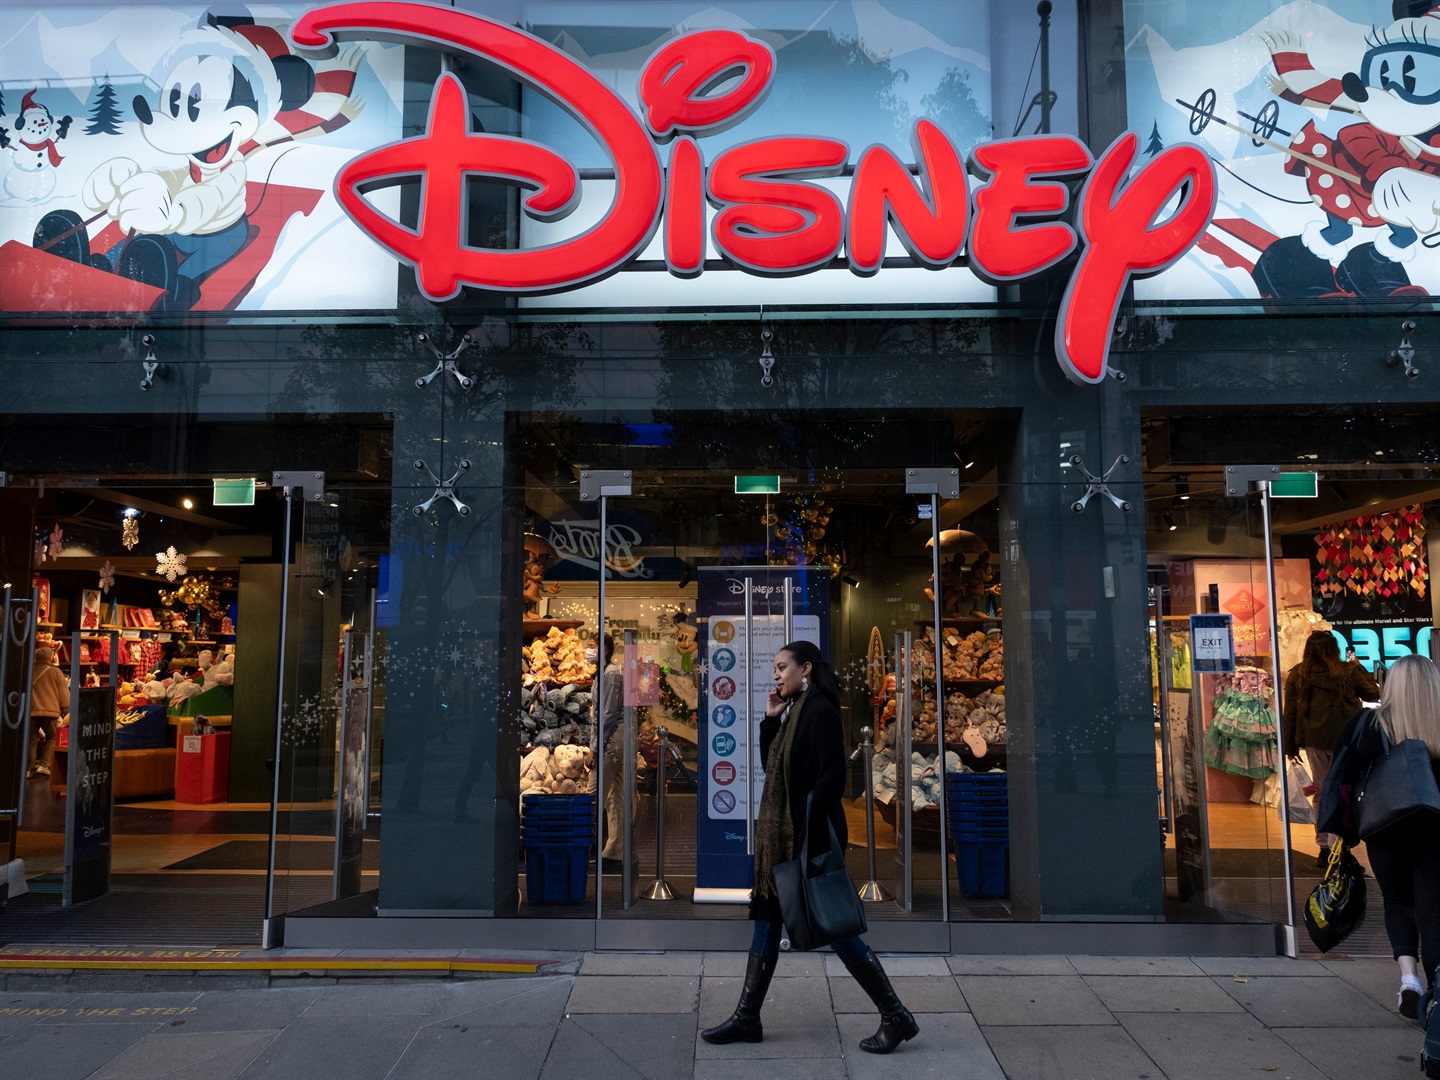 The Disney store in London. Mike Kemp/In Pictures via Getty Images